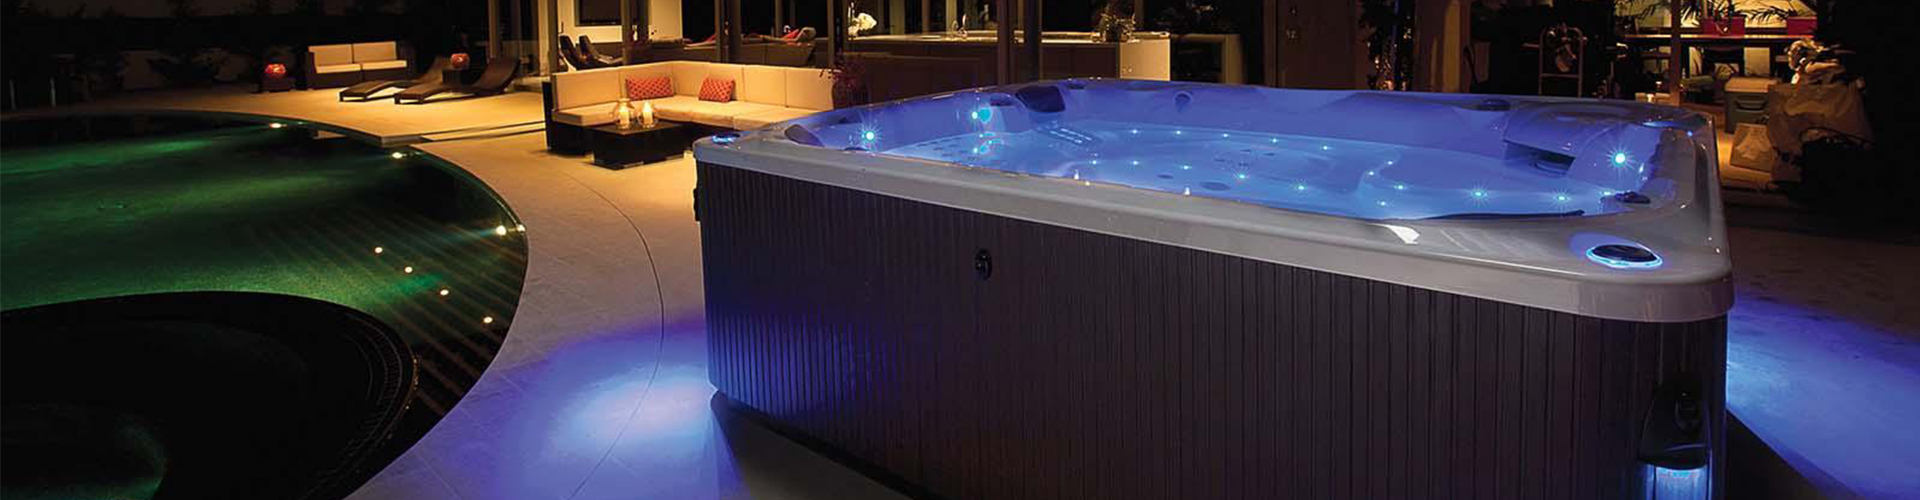 The Art of Hot Tub Relaxation